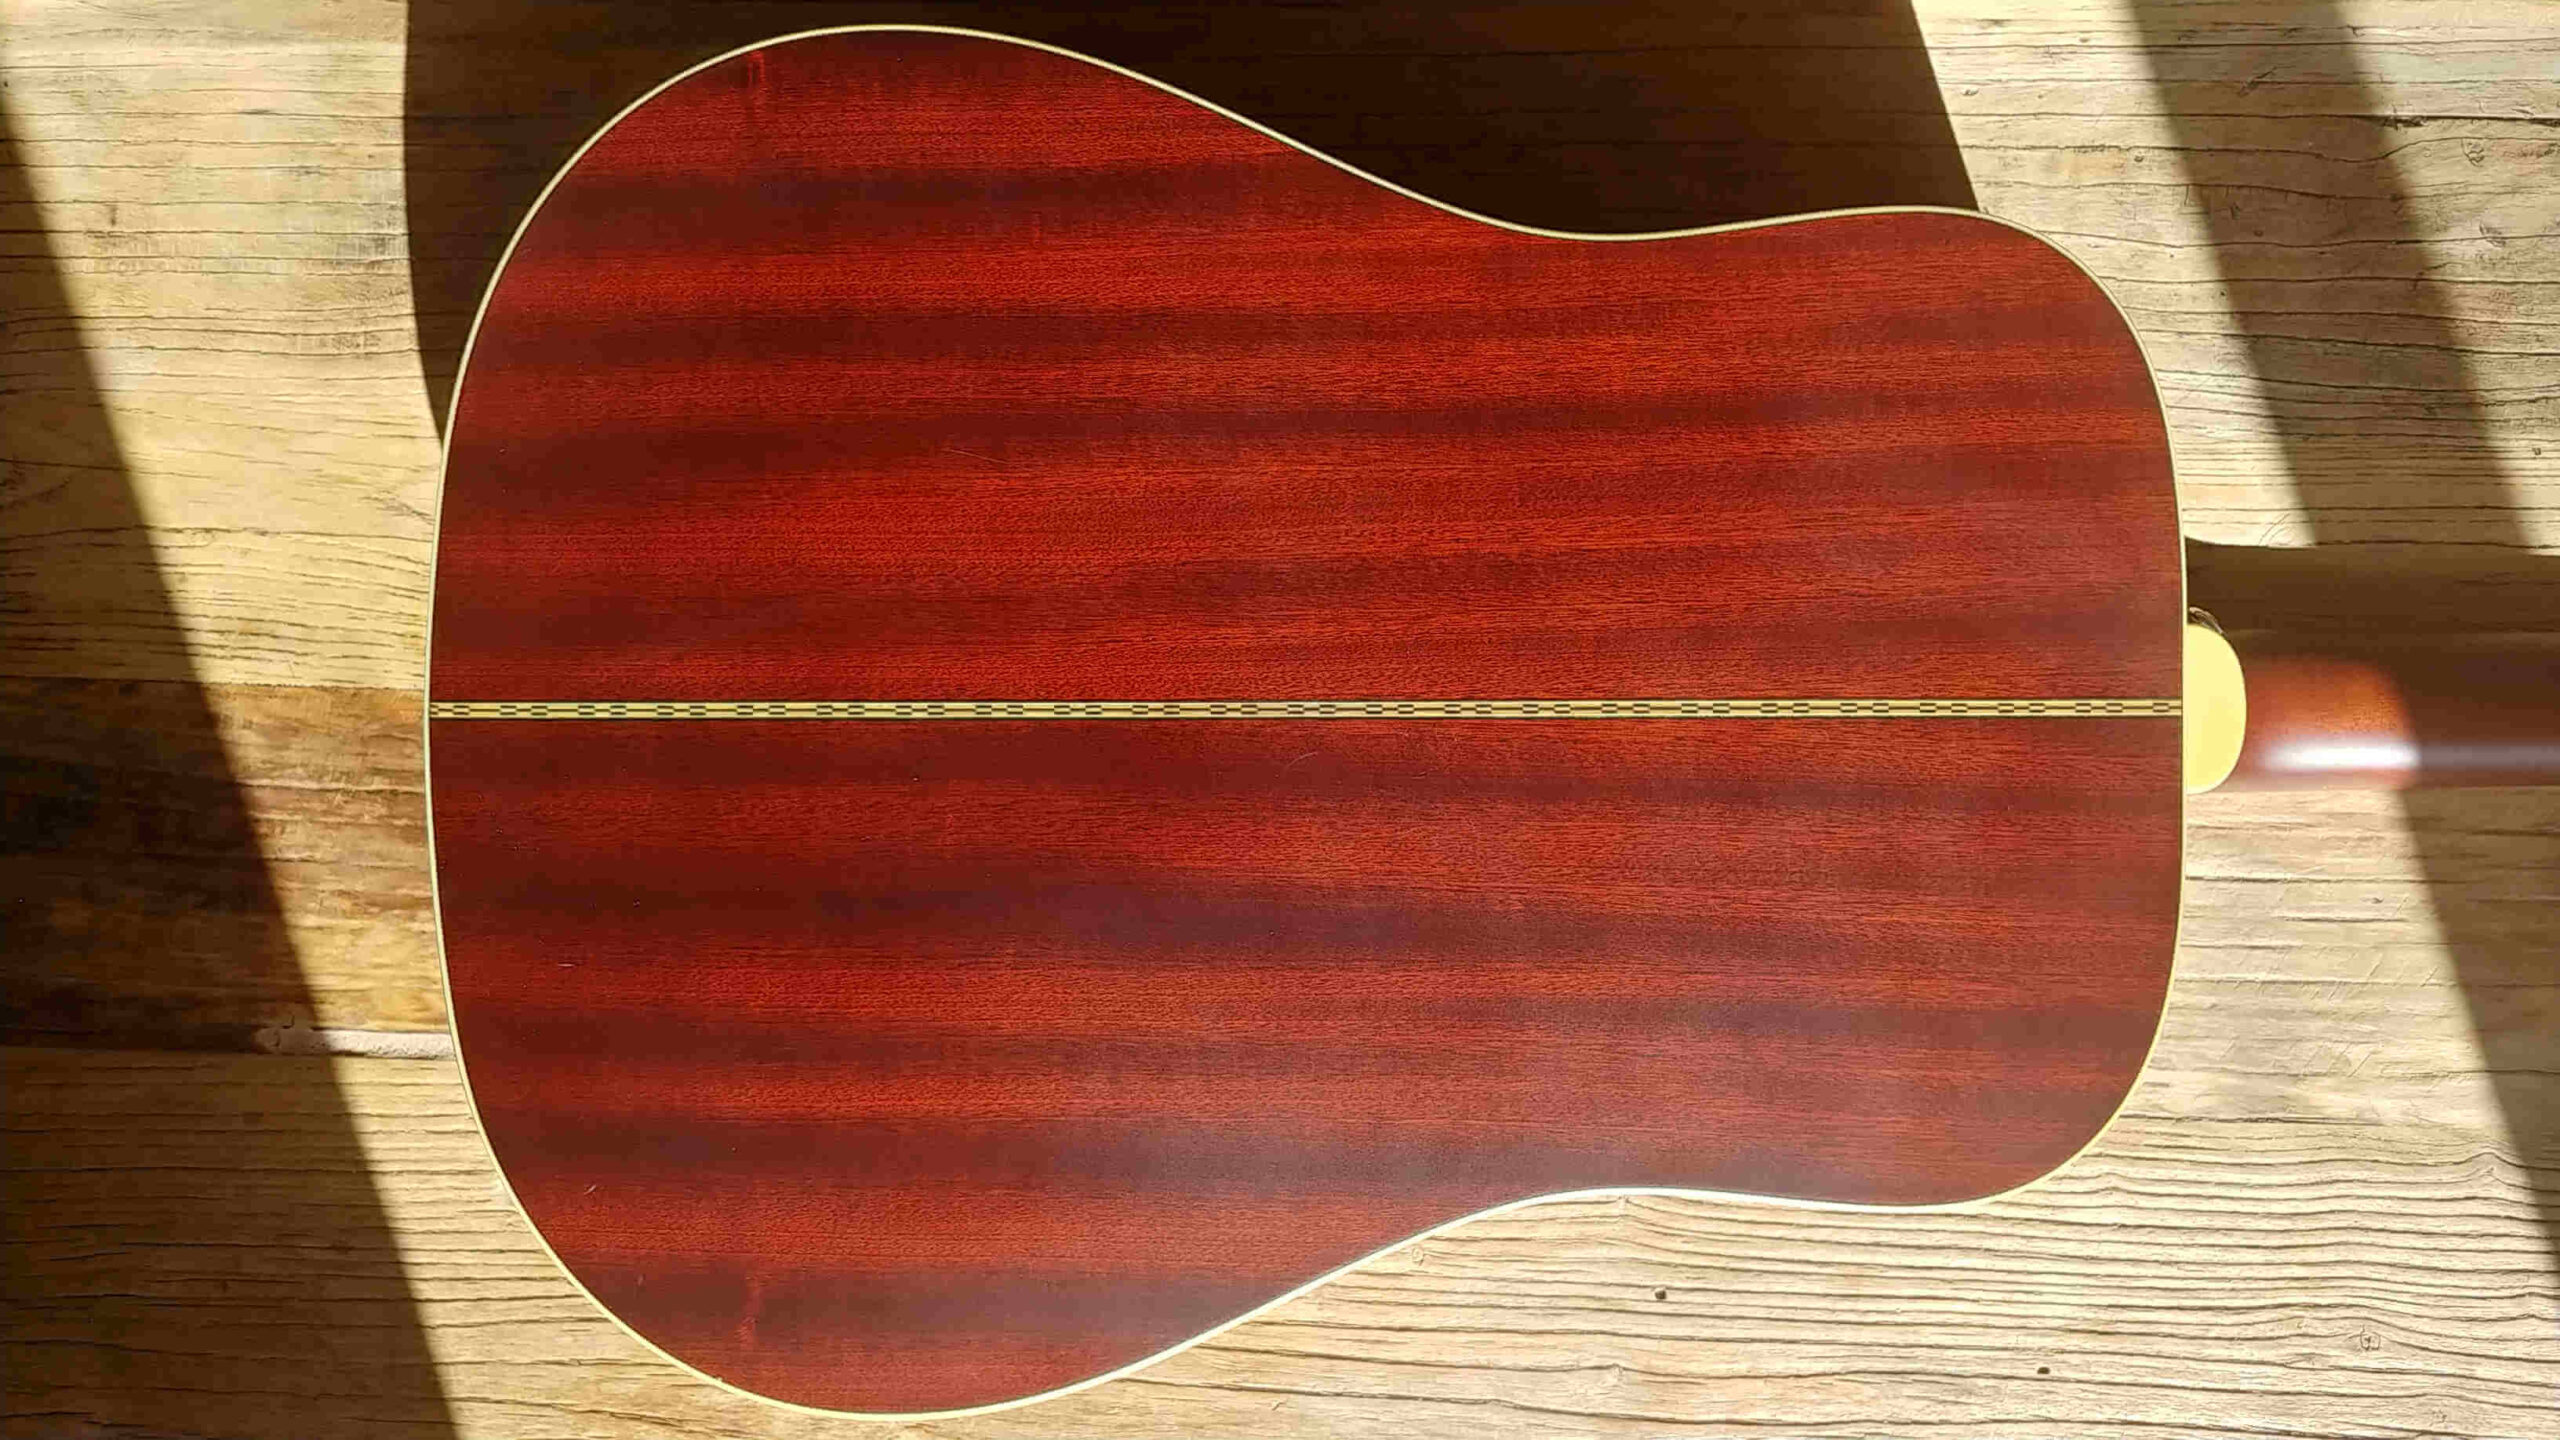 The mahogany back and sides of an Epiphone Masterbilt R-500MNS acoustic guitar.